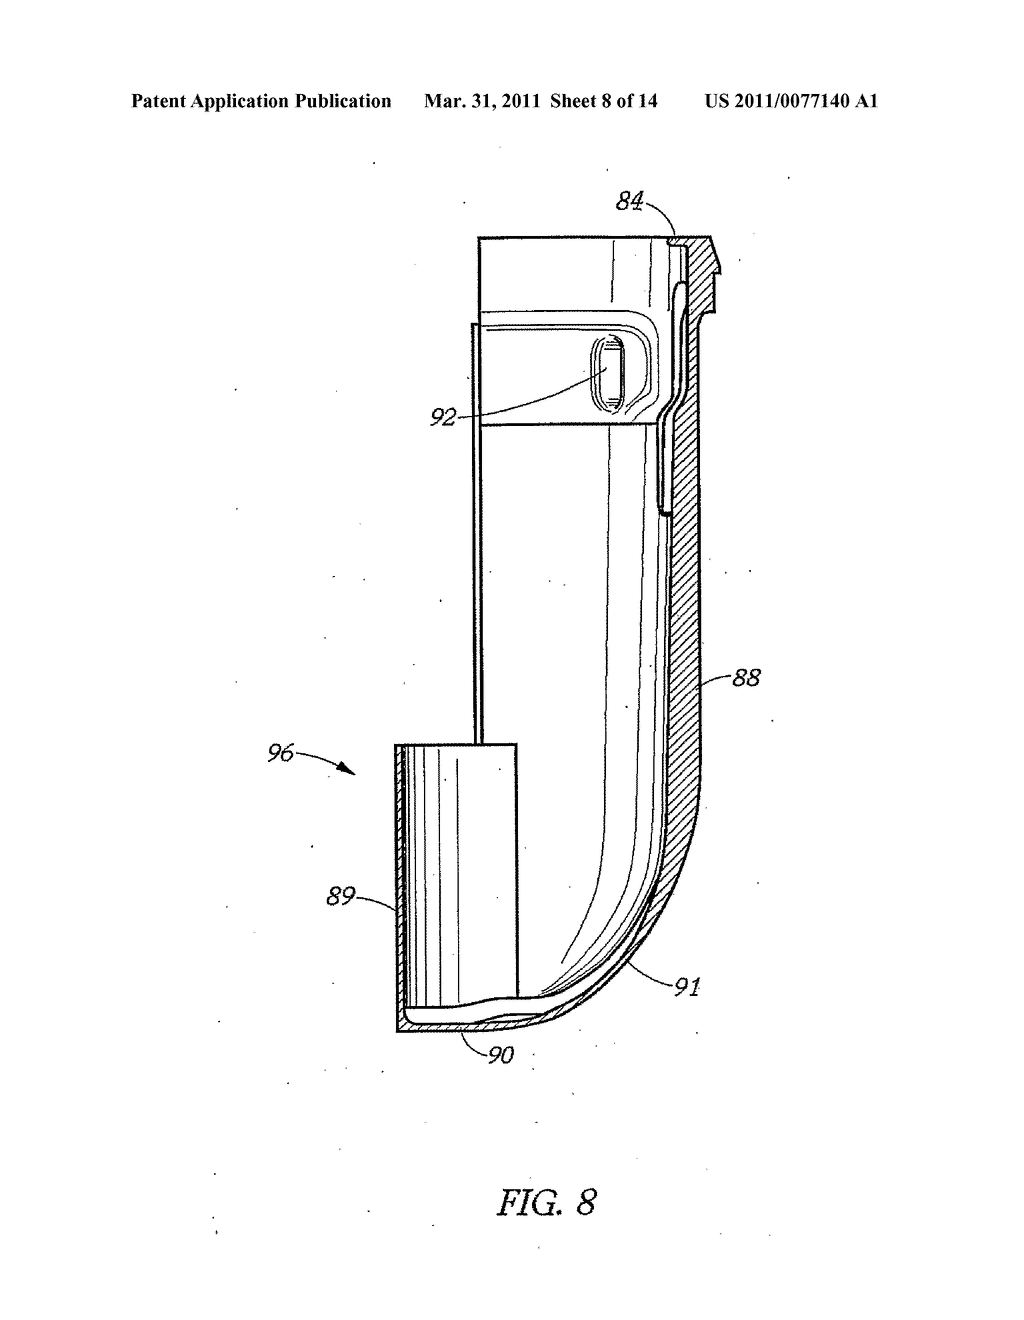 Apparatus and Method for Separating A Composite Liquid Into At Least Two Components - diagram, schematic, and image 09